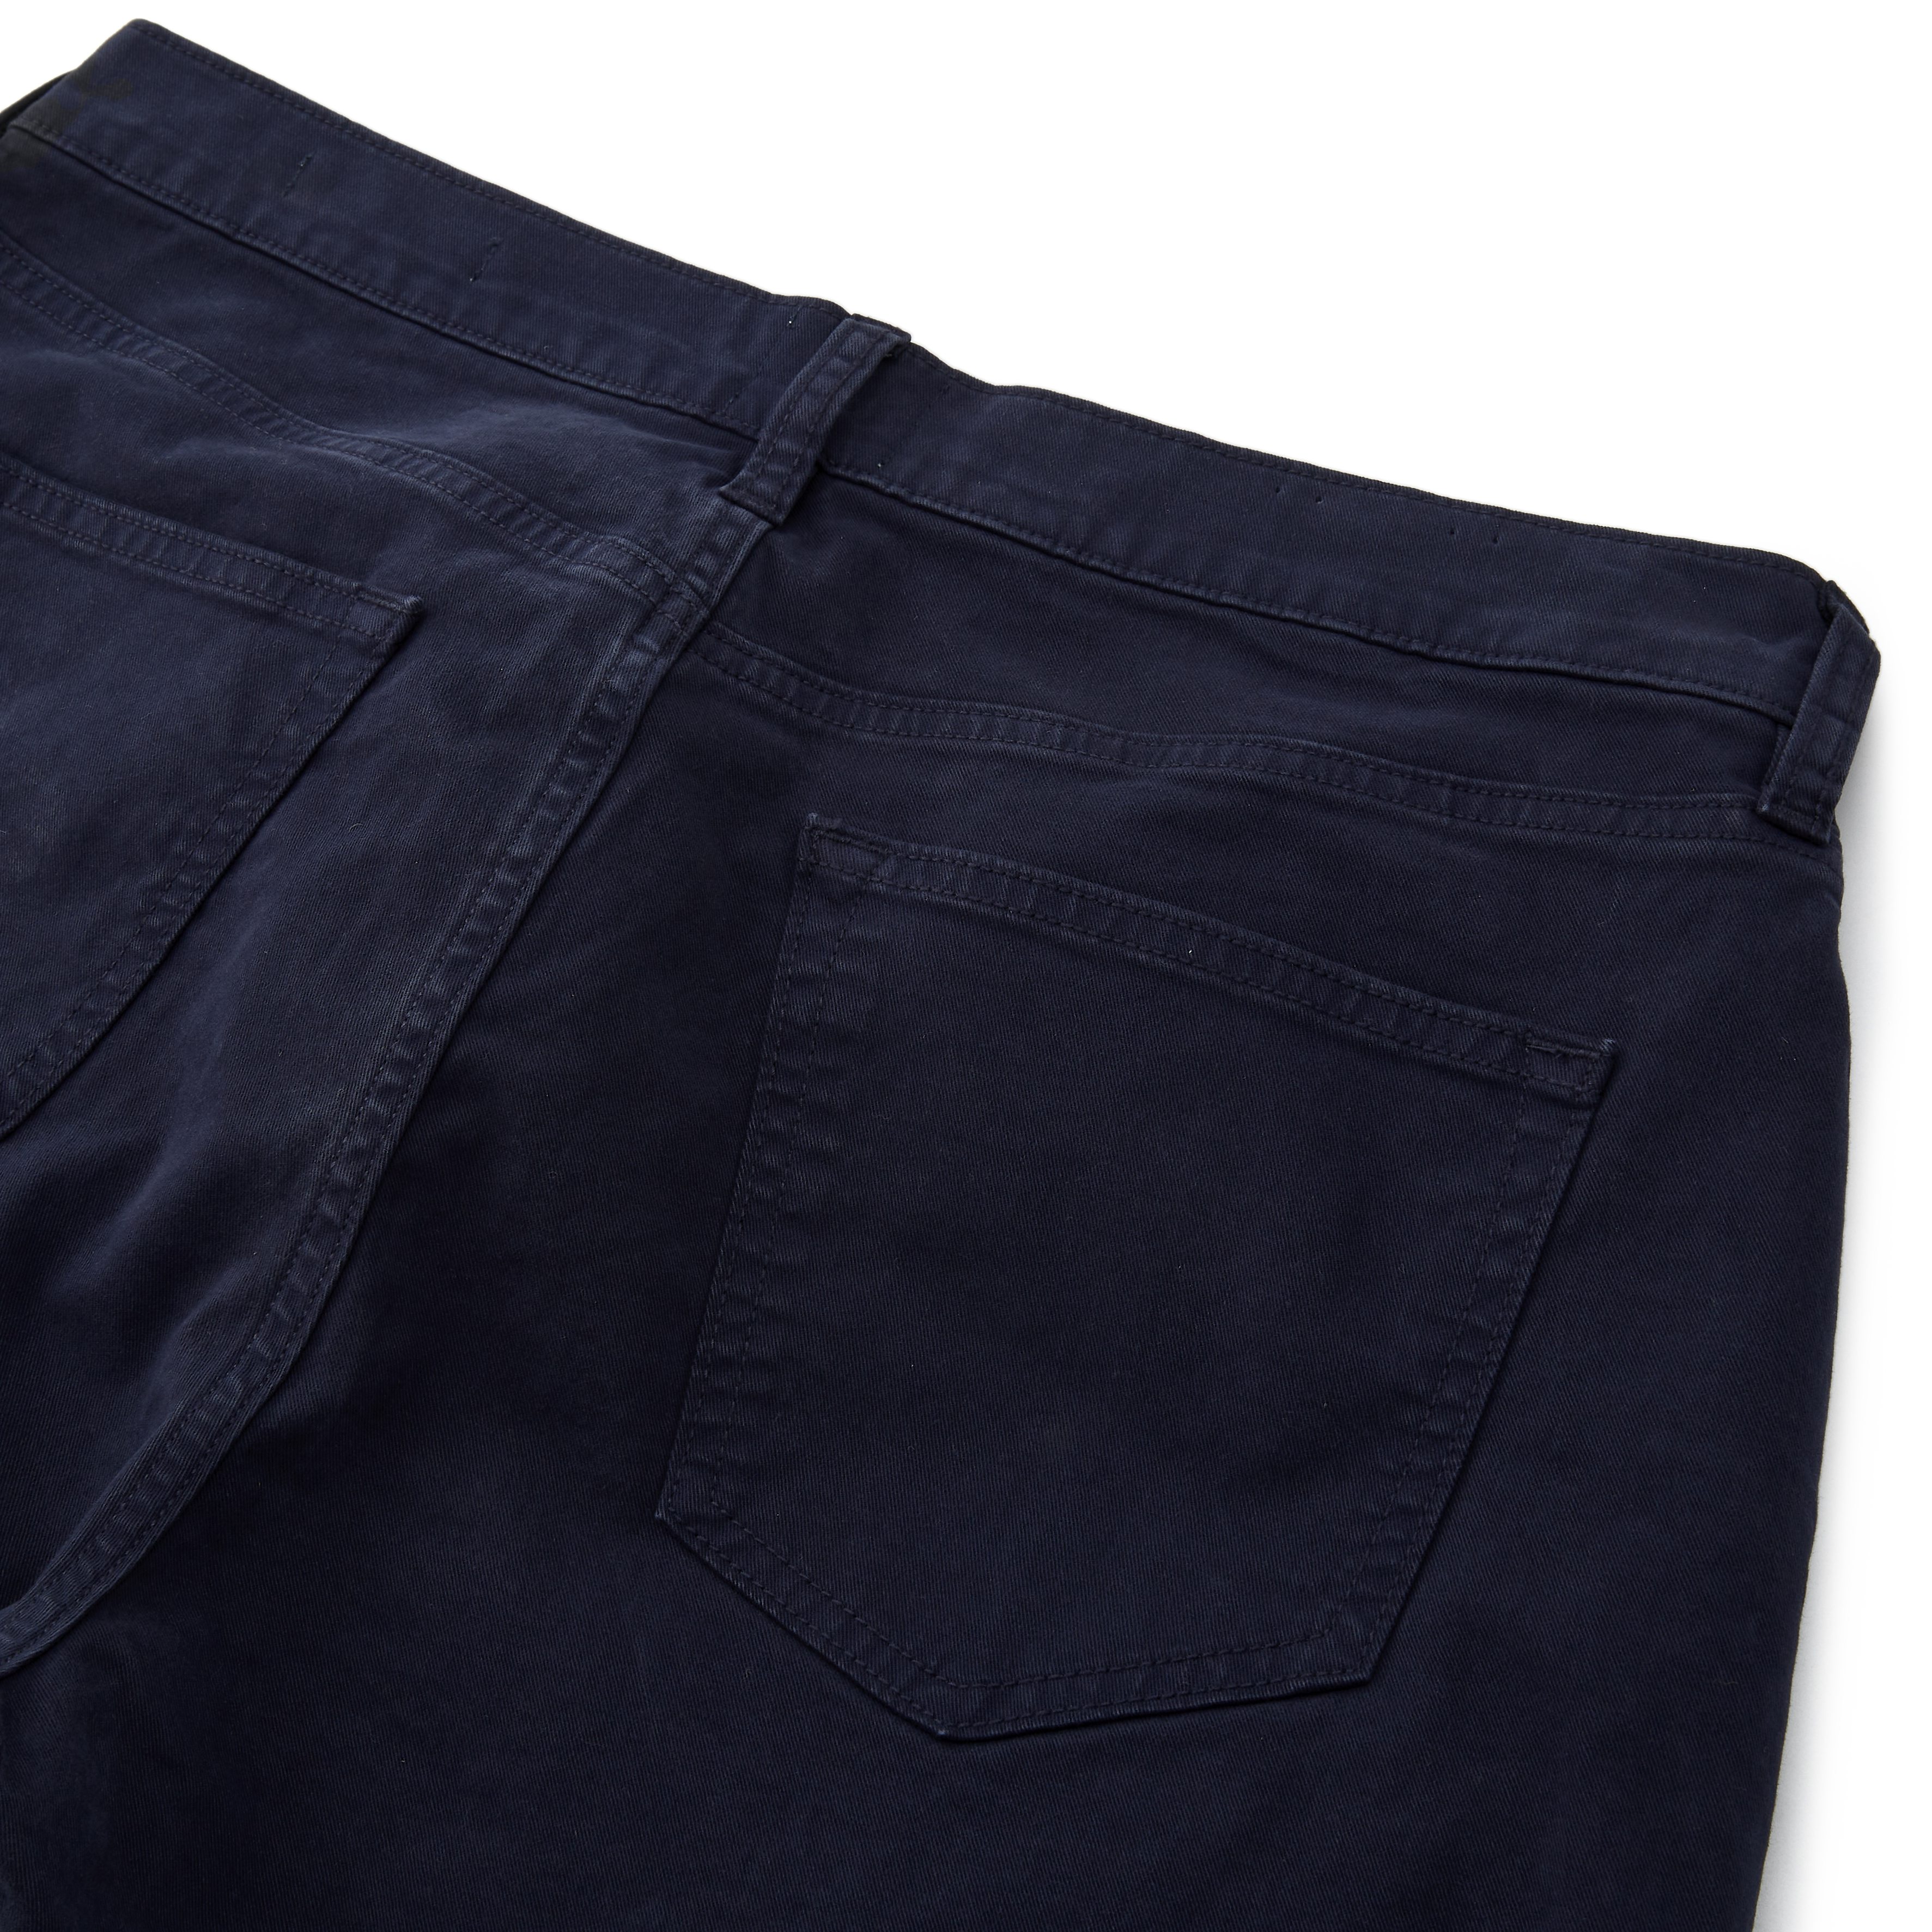 French Work Pants, Navy – Goods